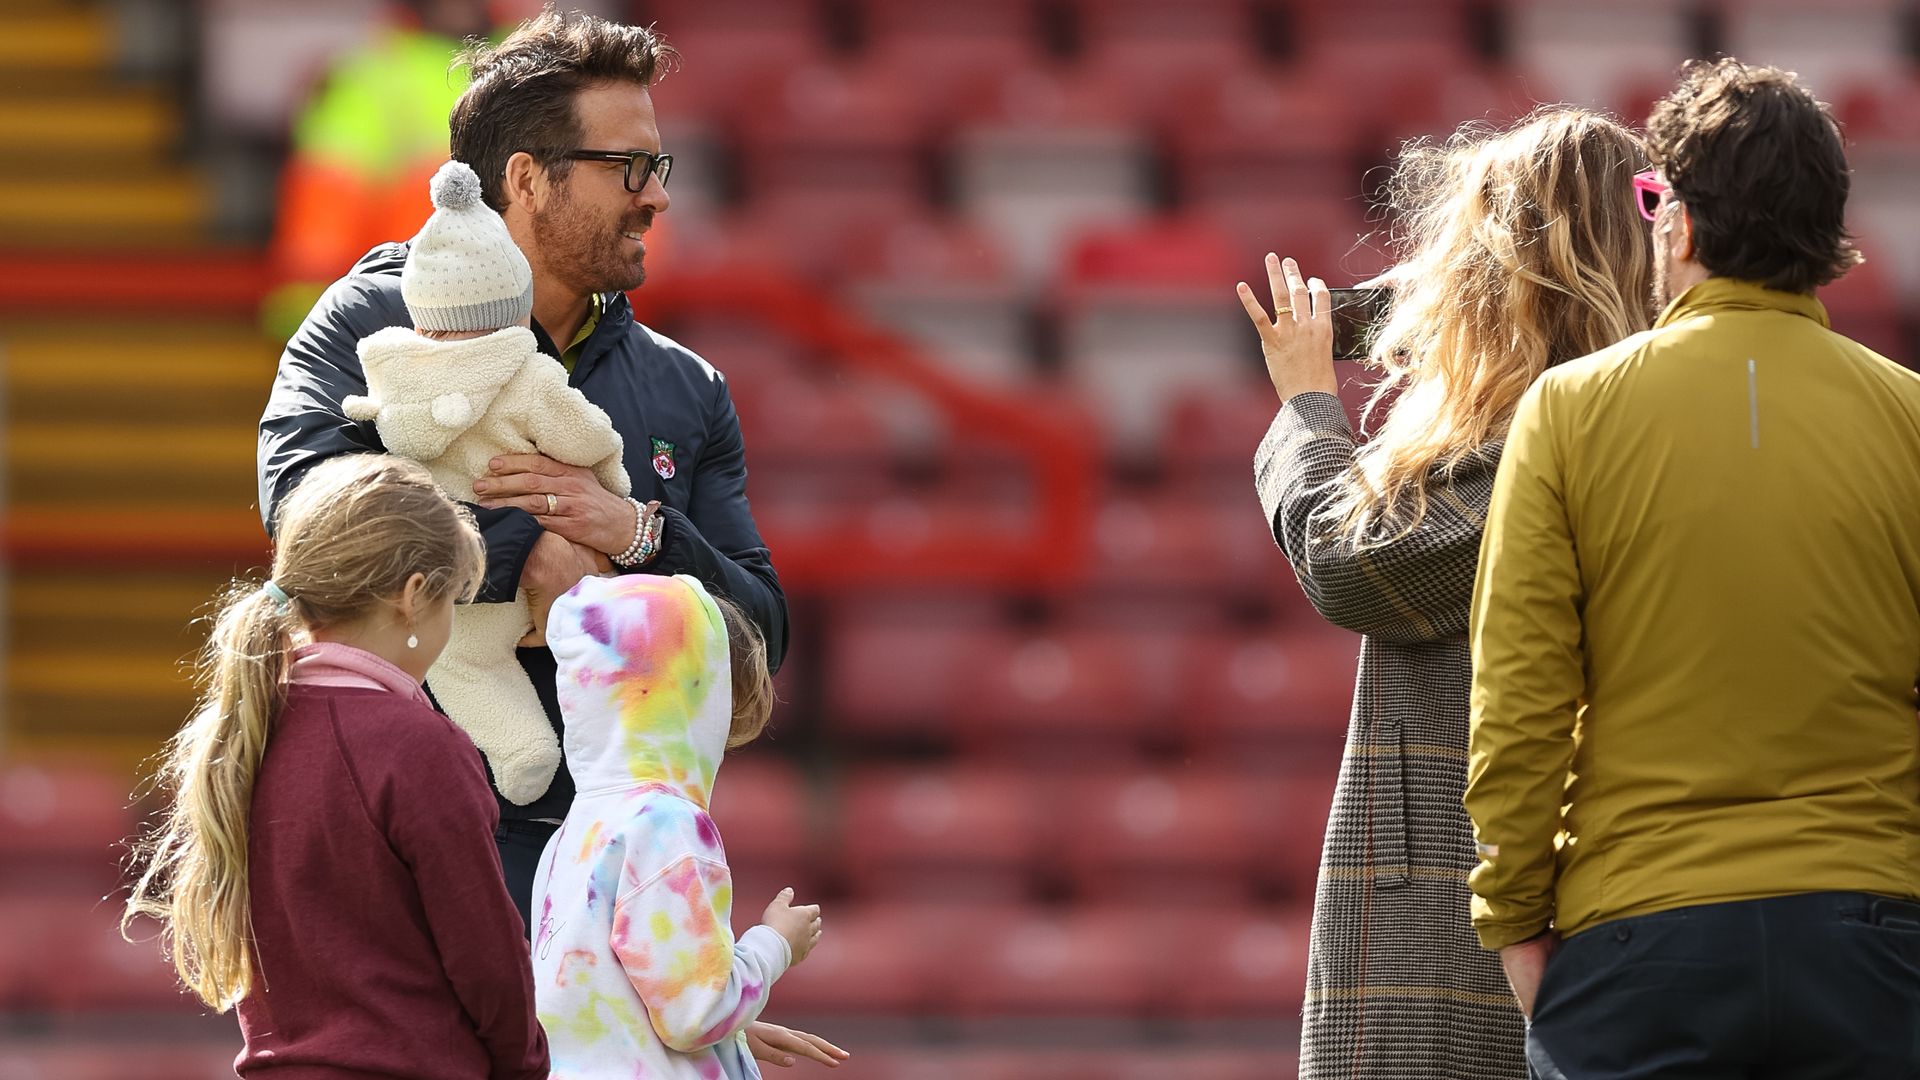 Ryan Reynolds stood holding his newborn, his daughters next to him, Blake Lively is taking a photo of them